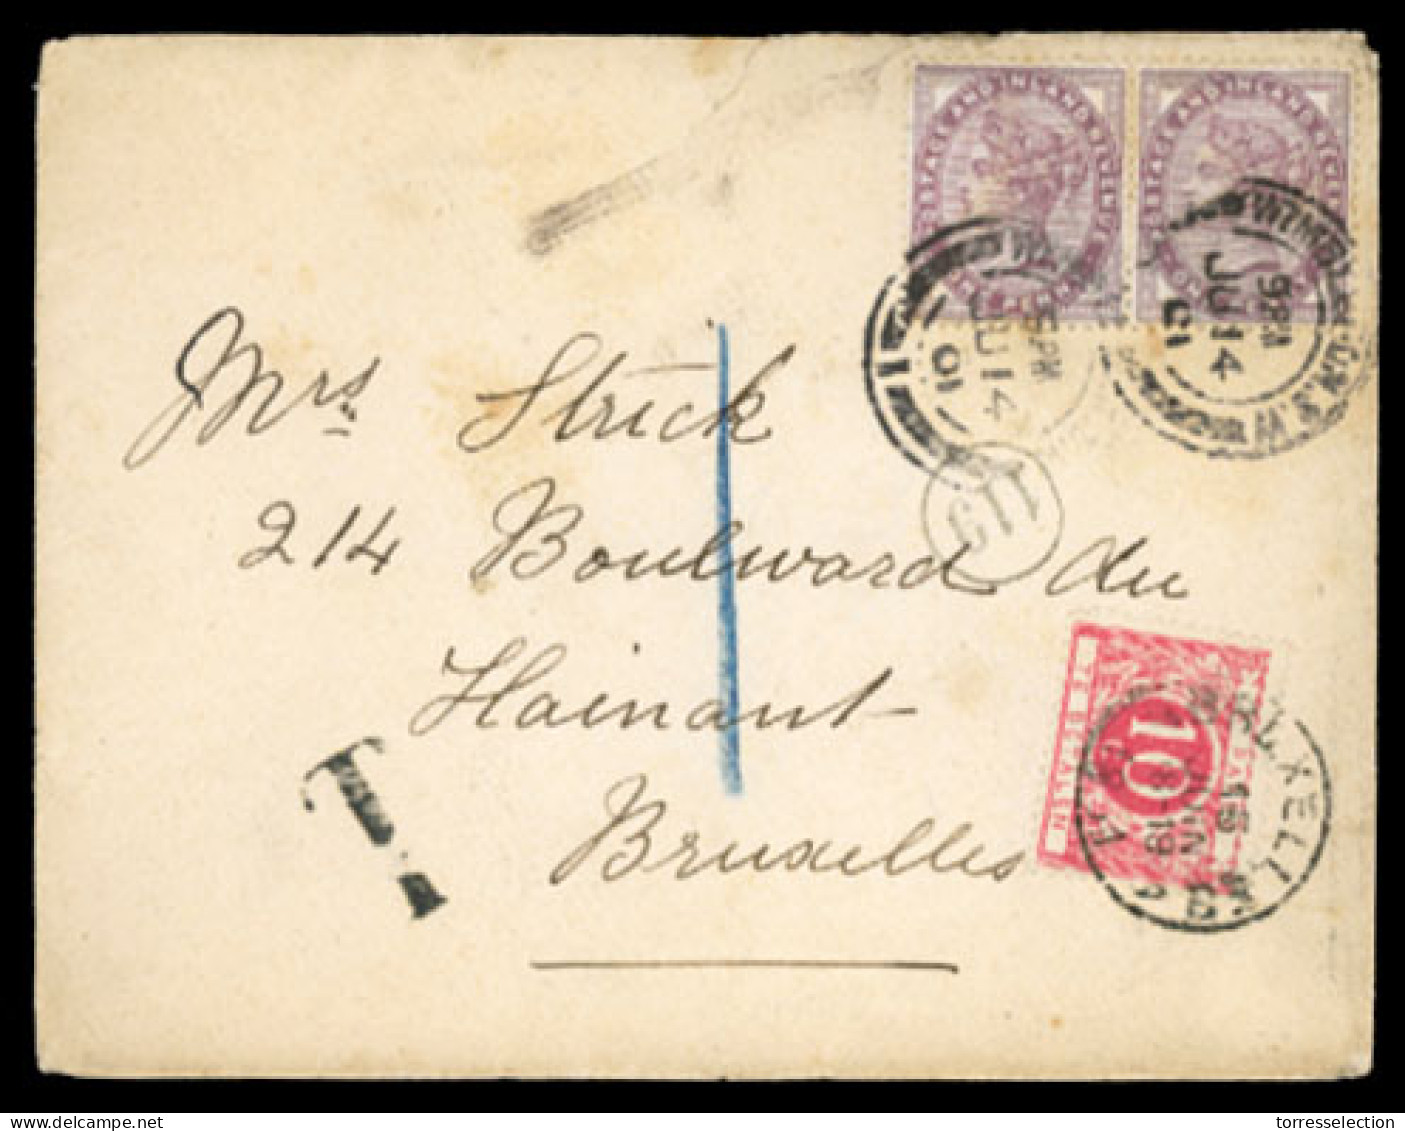 GREAT BRITAIN. 1901. Wimbley To Belgium. Taxed Frkd Env.+postage Due (be==Belgium). F-VF. - ...-1840 Vorläufer